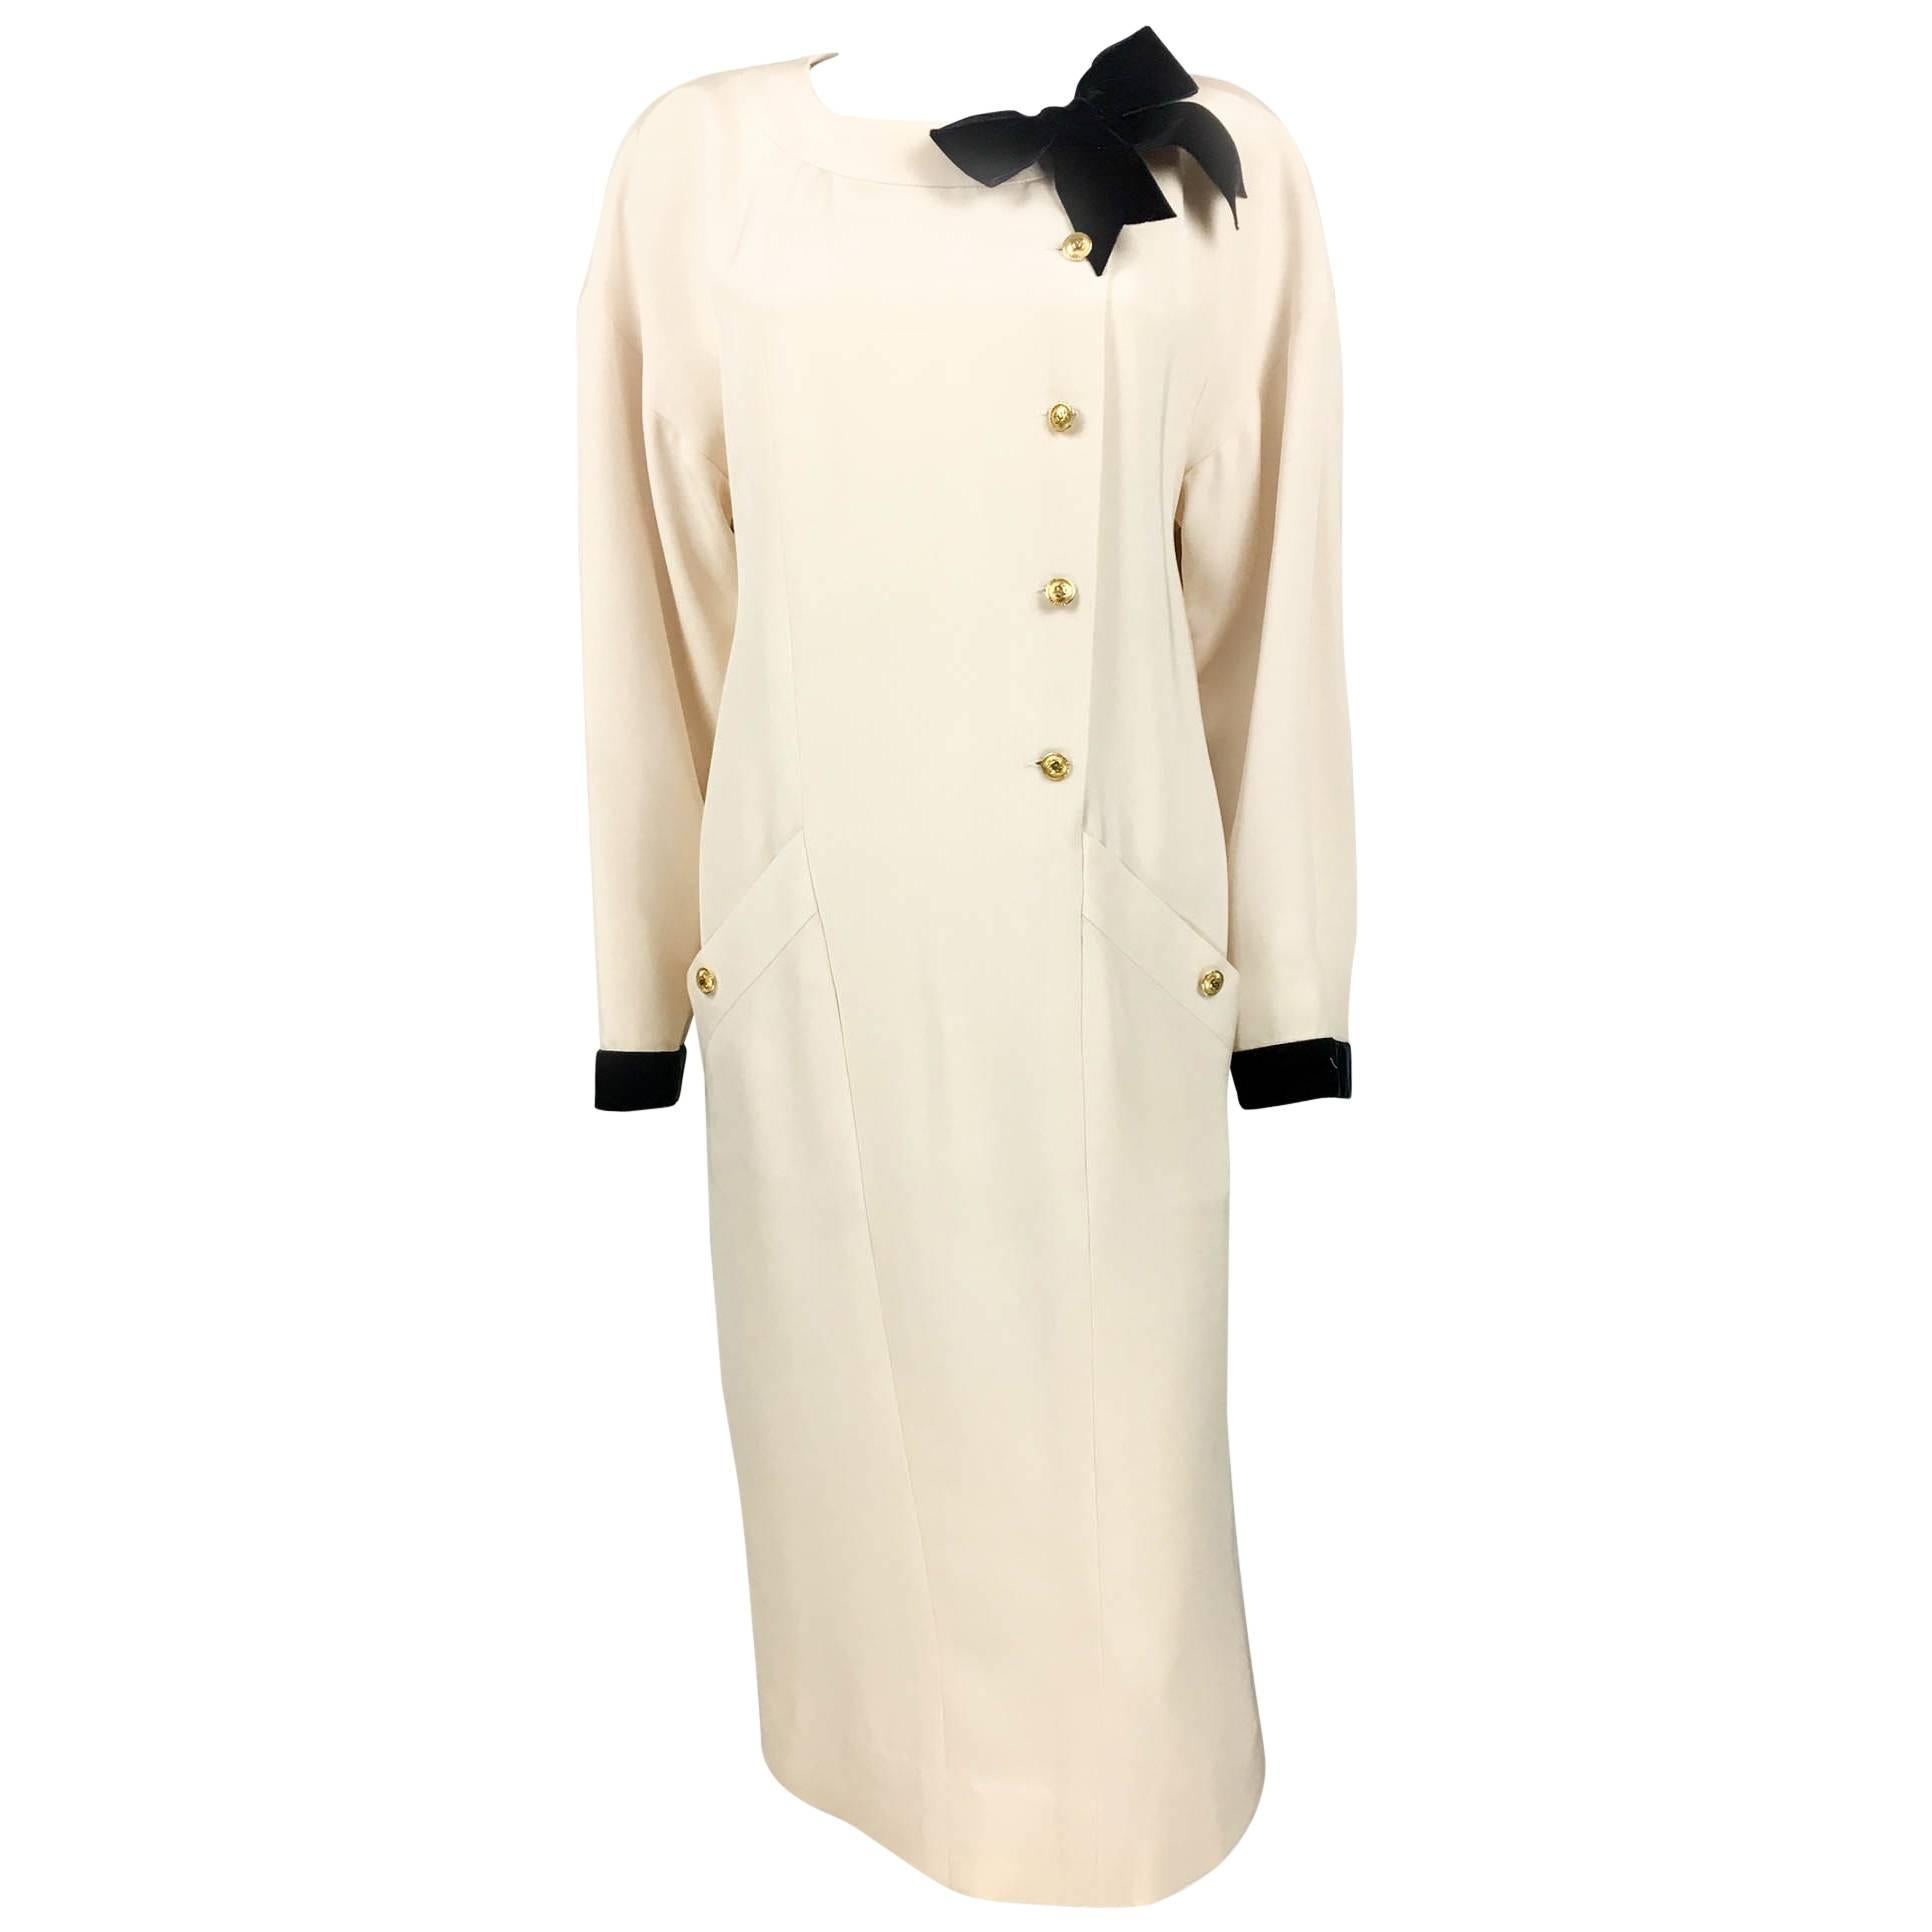 Chanel Champagne Silk Dress With Black Velvet Cuffs and Bow - 1980s For Sale